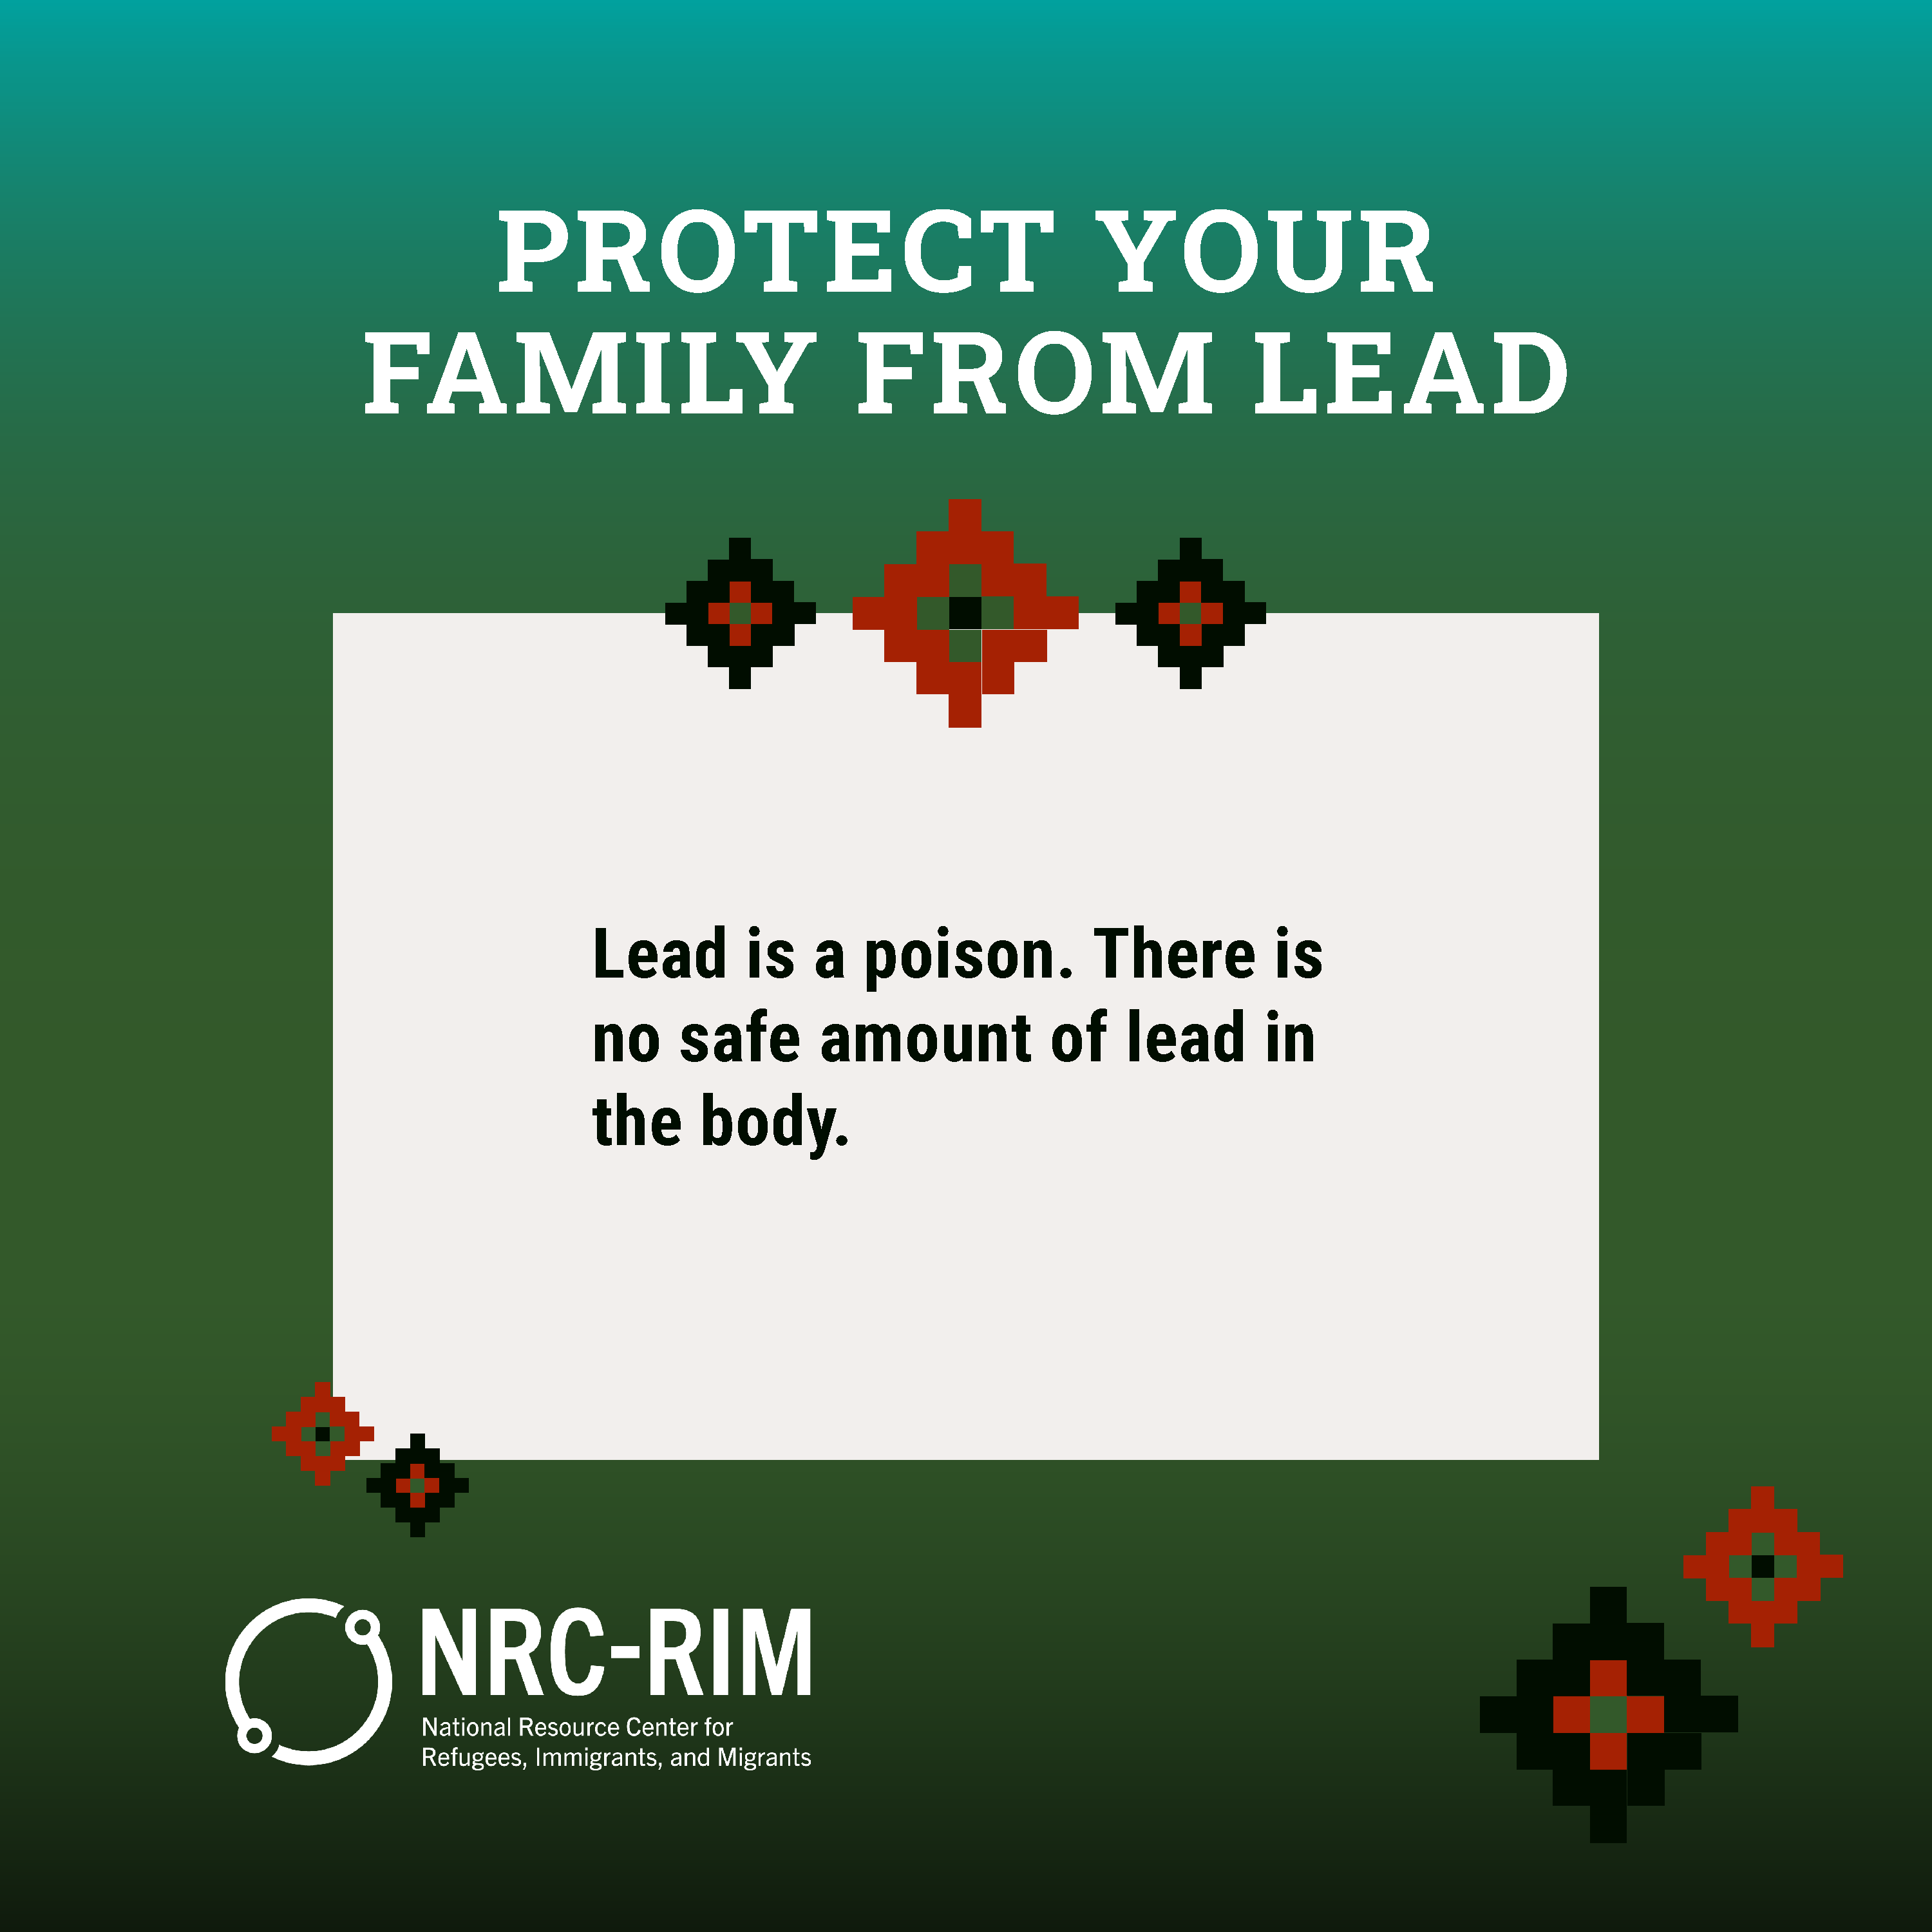 "Lead is a poison. There is no safe amount of lead in the body."